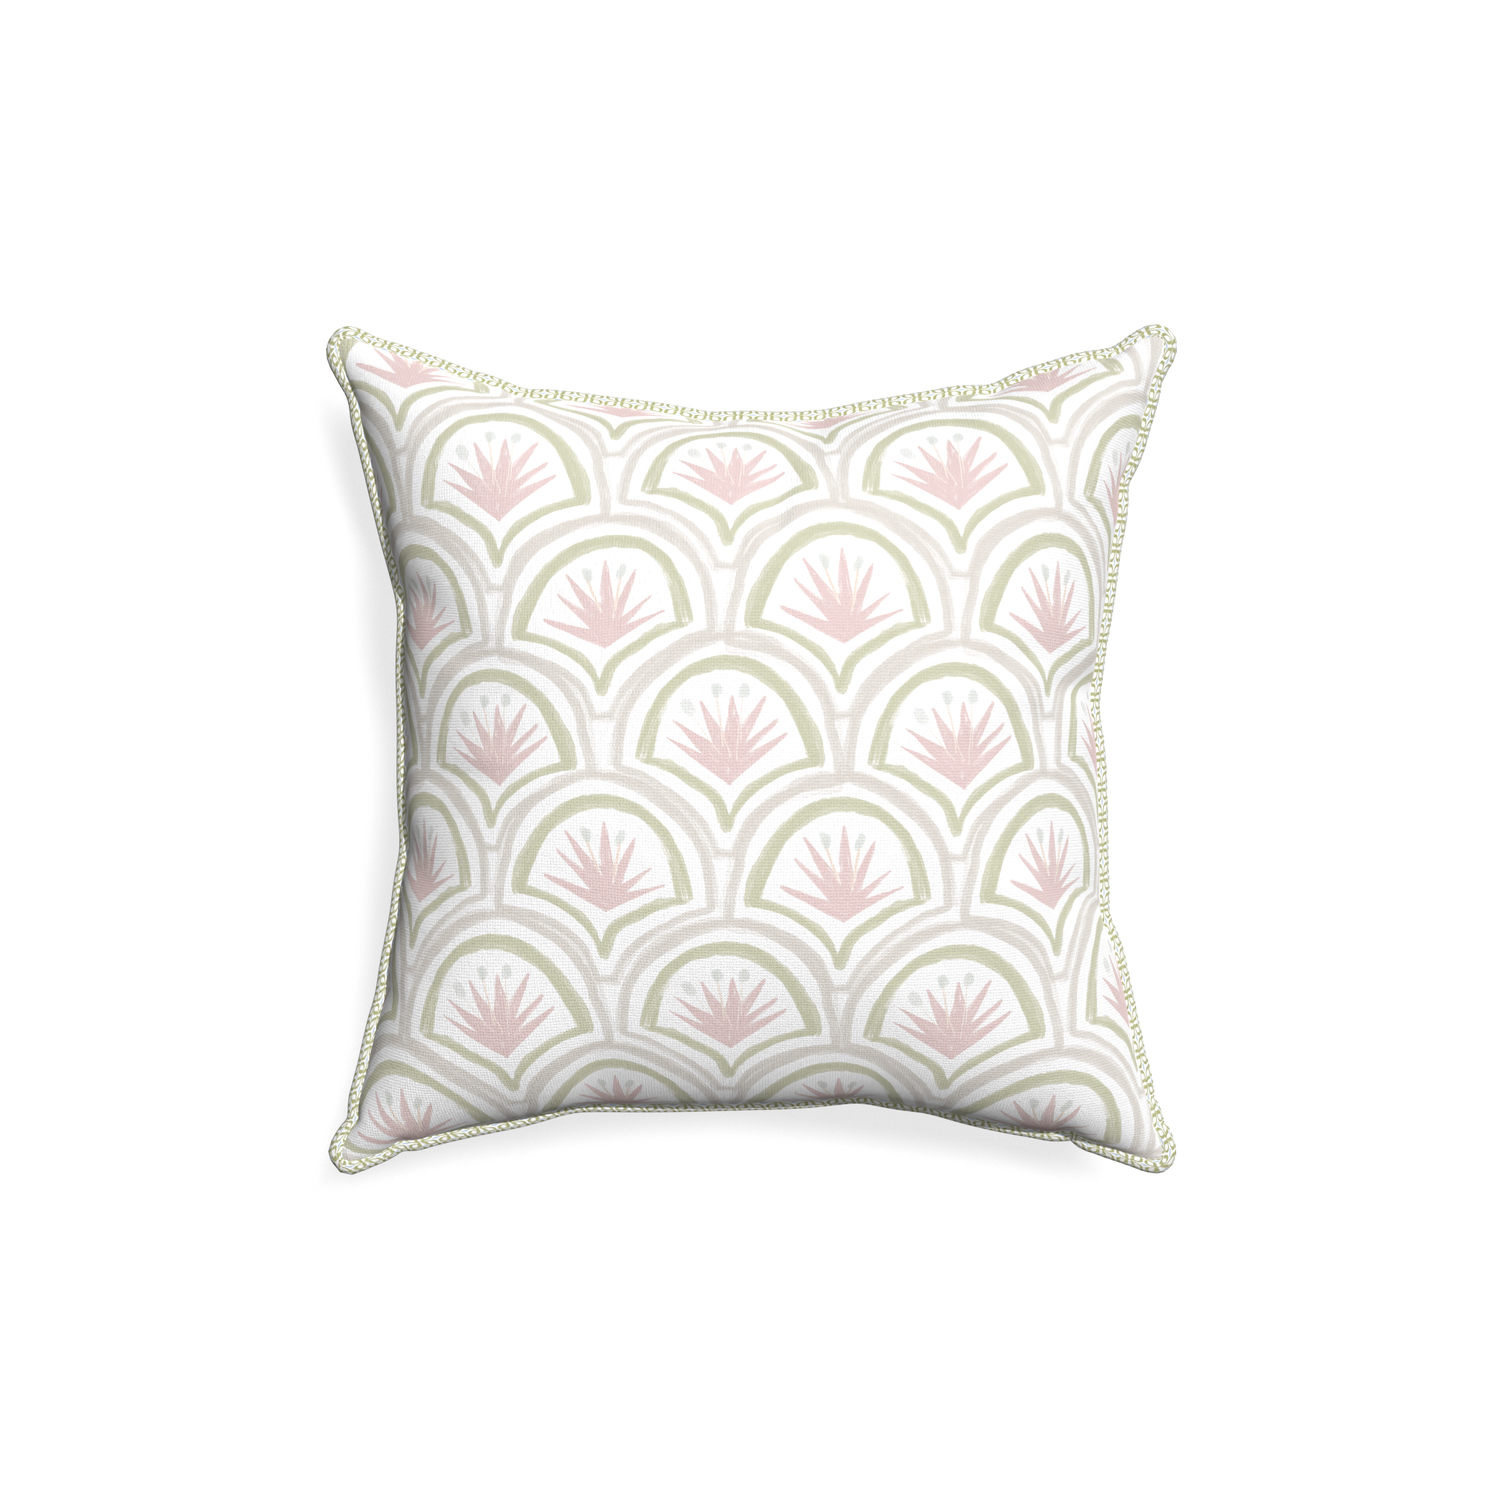 18-square thatcher rose custom pillow with l piping on white background